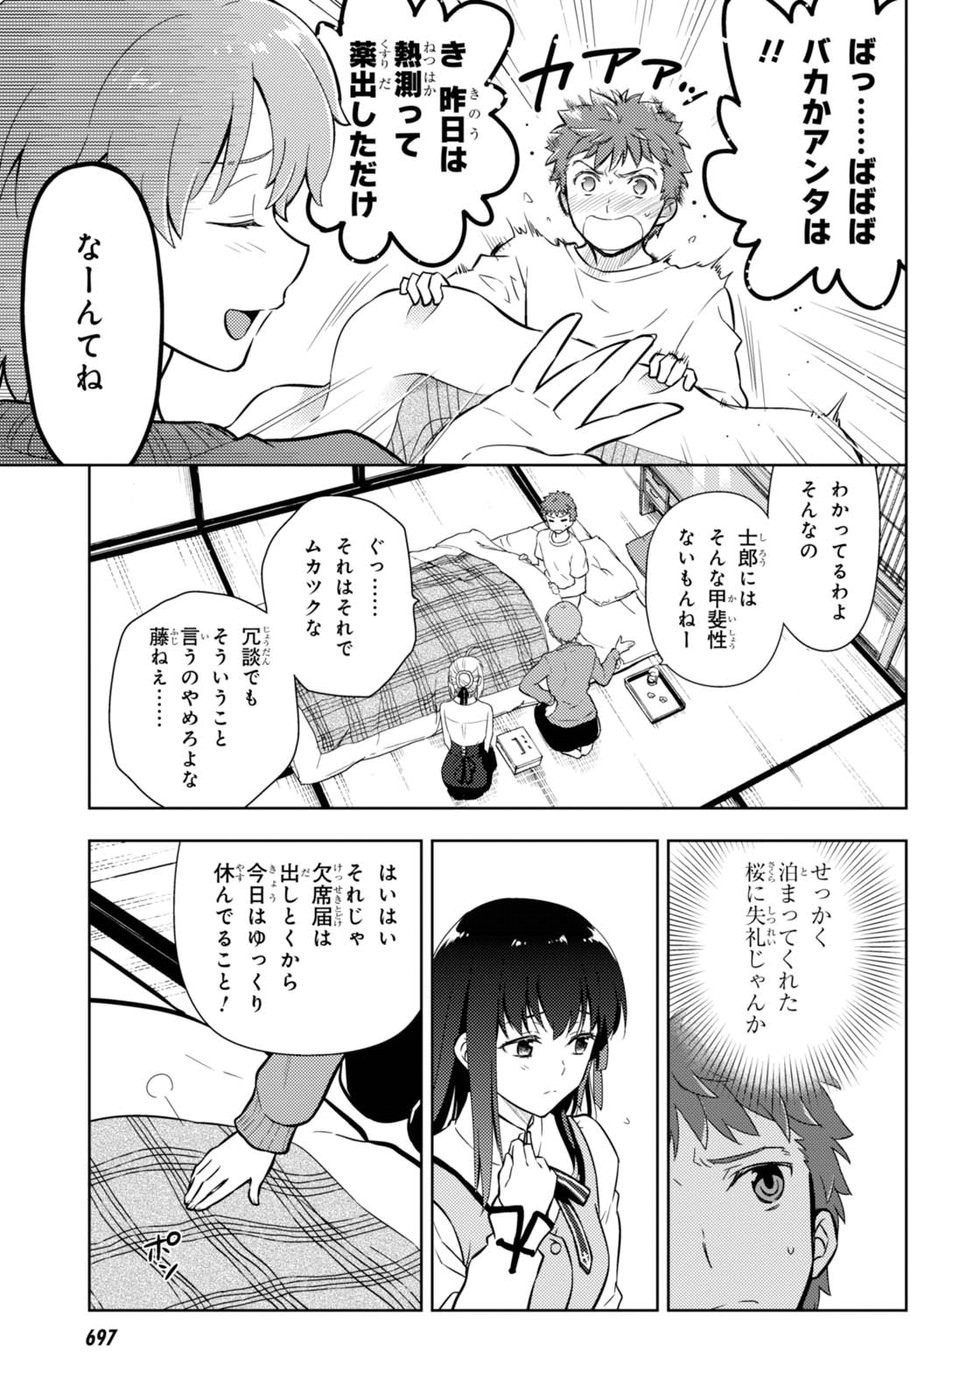 Fate/Stay night Heaven's Feel - Chapter 32 - Page 5